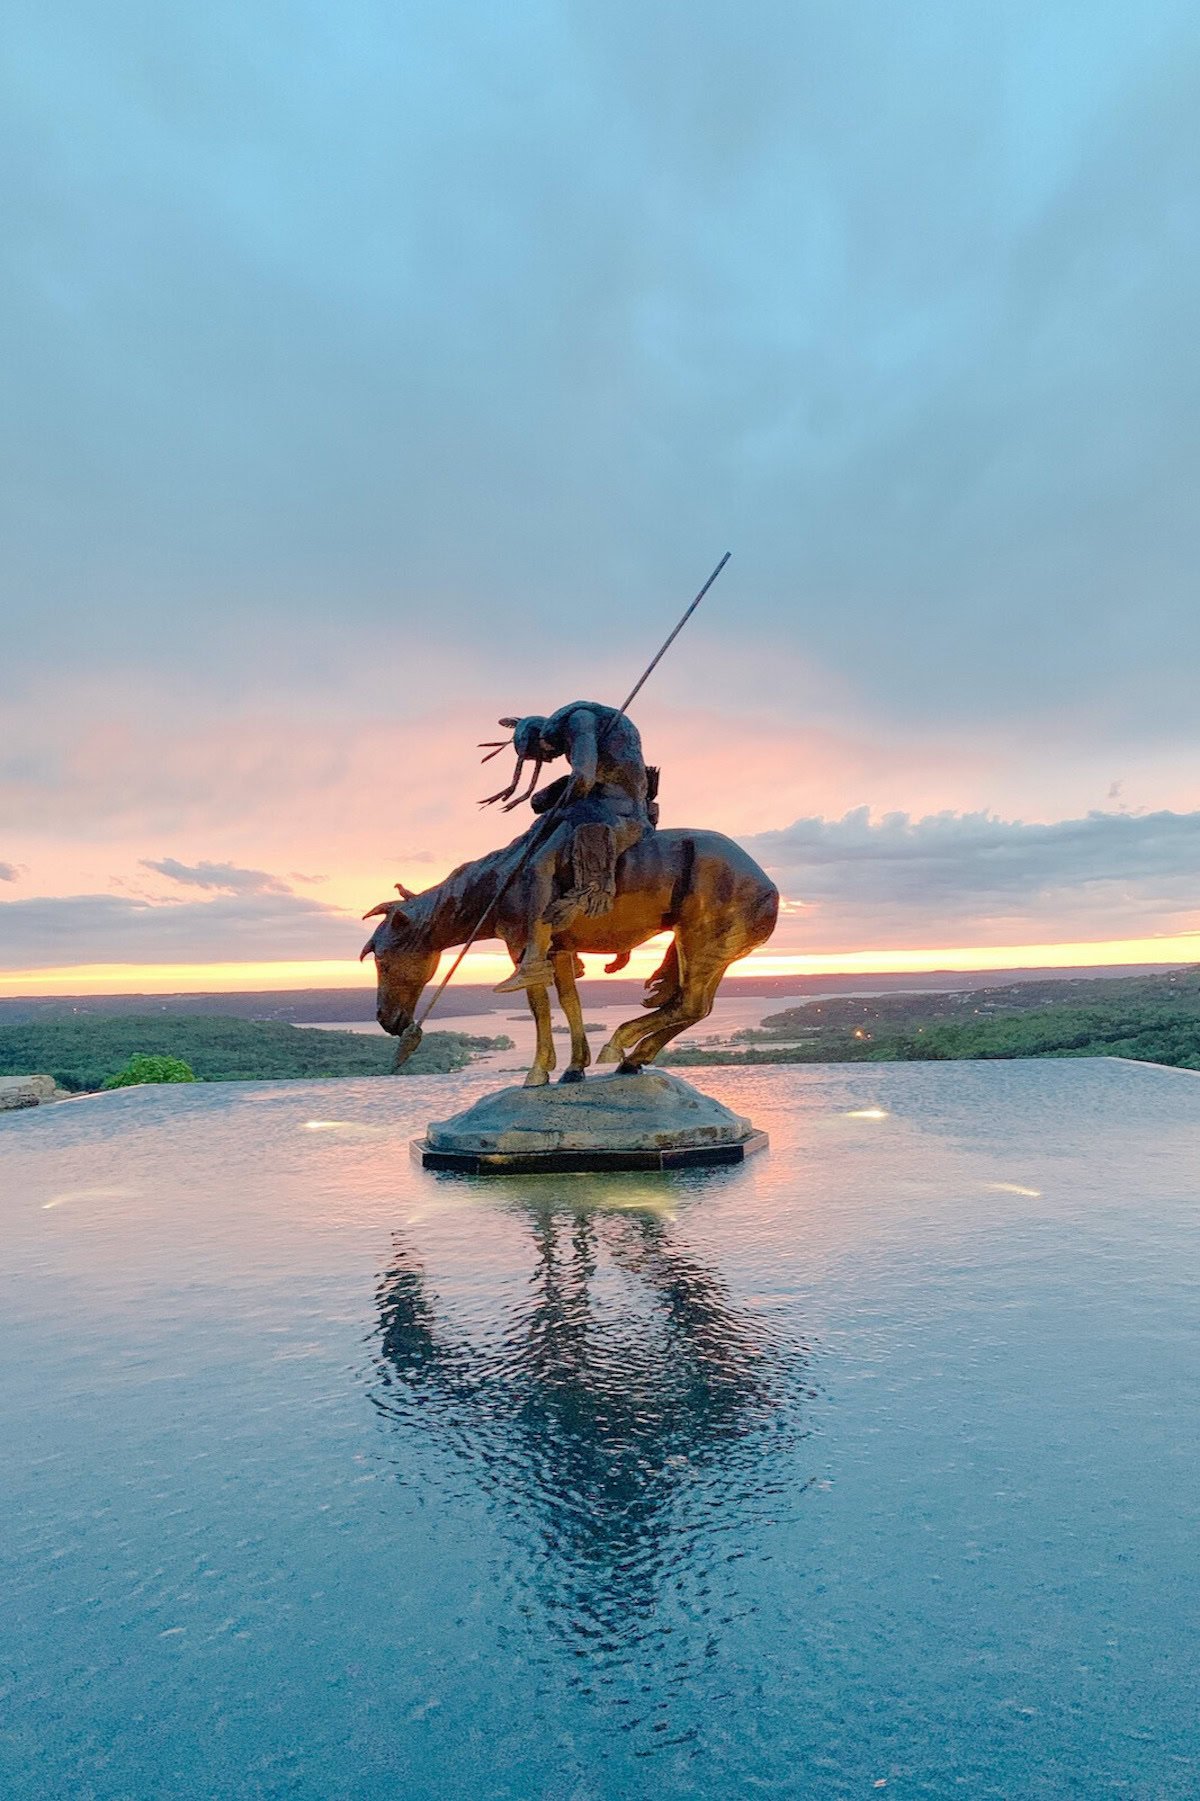 A bronze statue of a man on a horse, both appearing tired, stands on a small platform surrounded by water. This remarkable sight is one of the many things to do in Branson, where the background features a colorful sunset over a vast landscape.